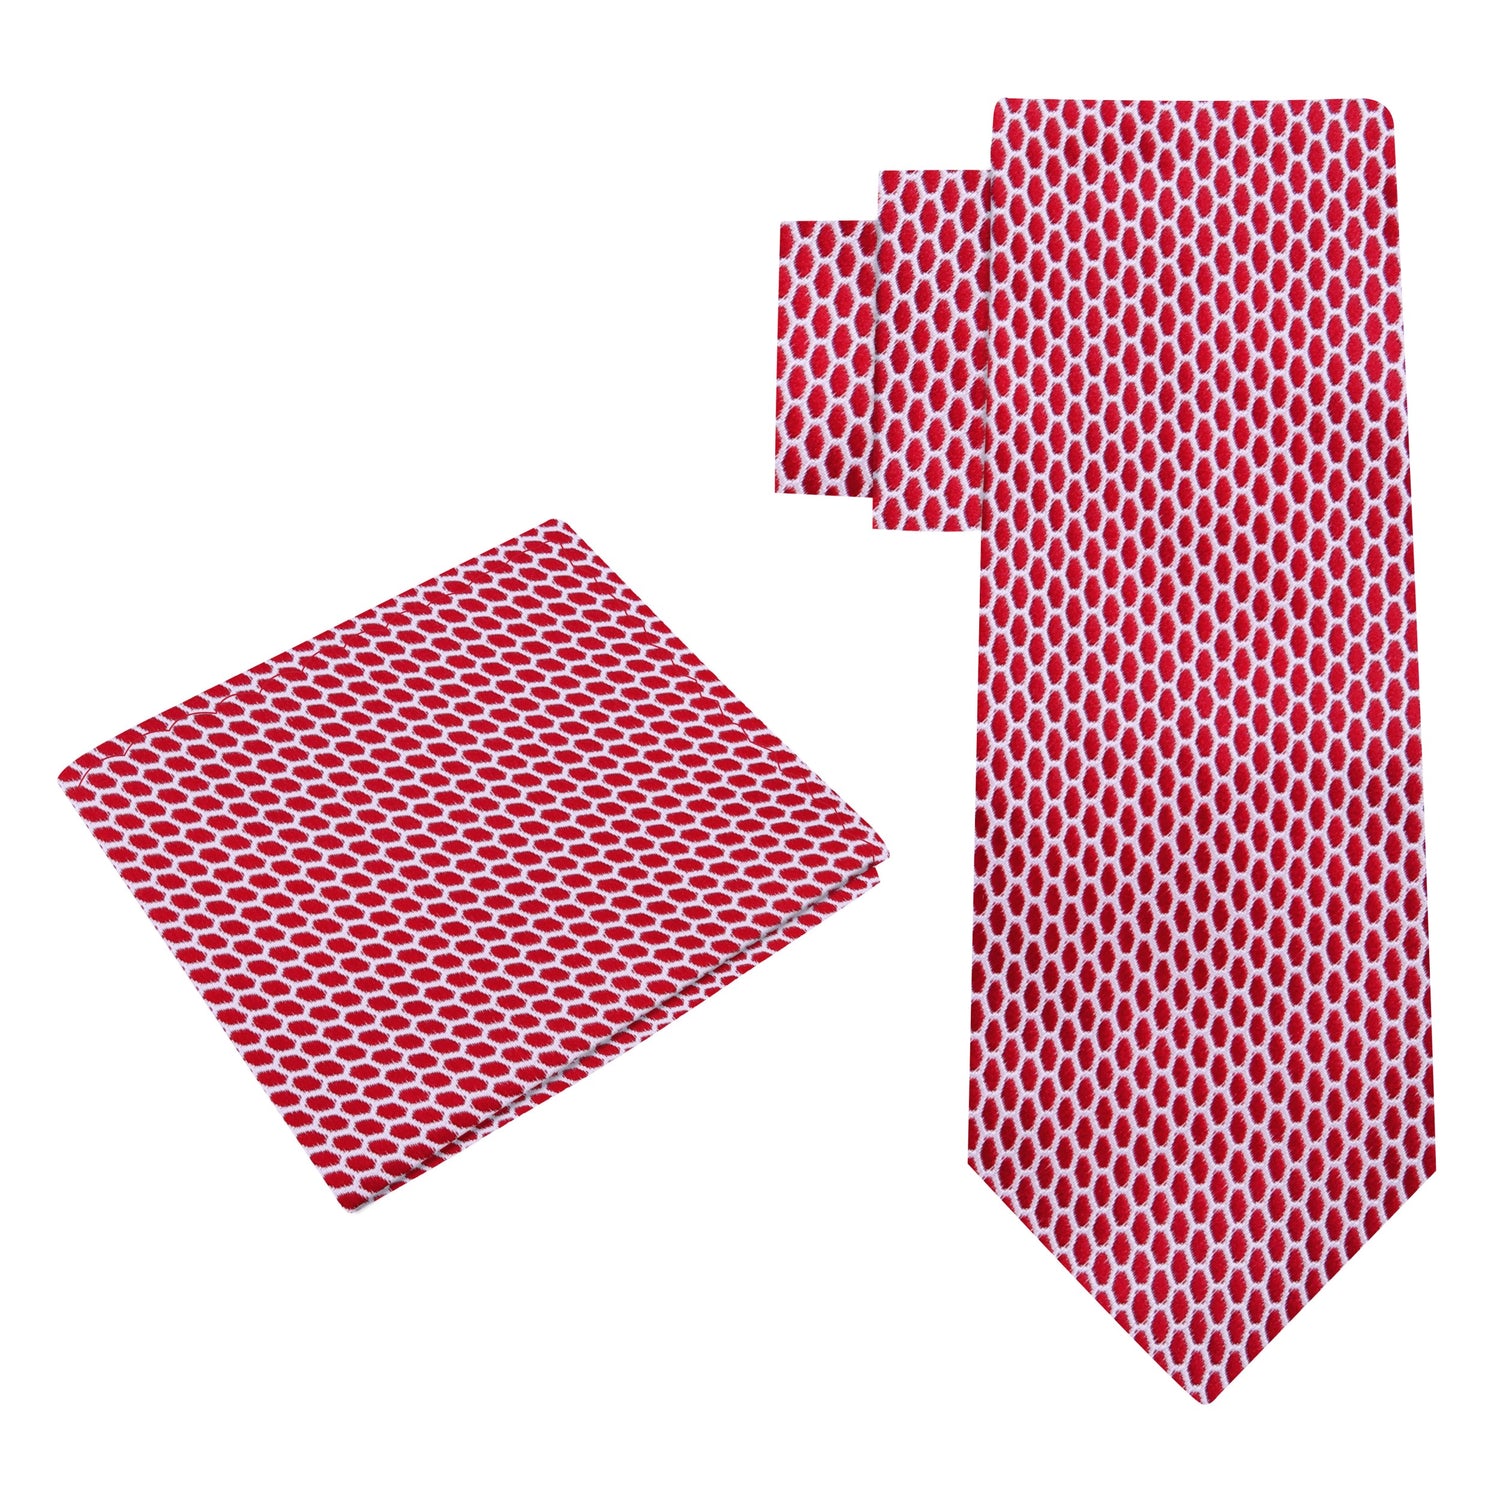 Alt View: A Red, White Geometric Oval Shaped Pattern Silk Necktie, Matching Pocket Square